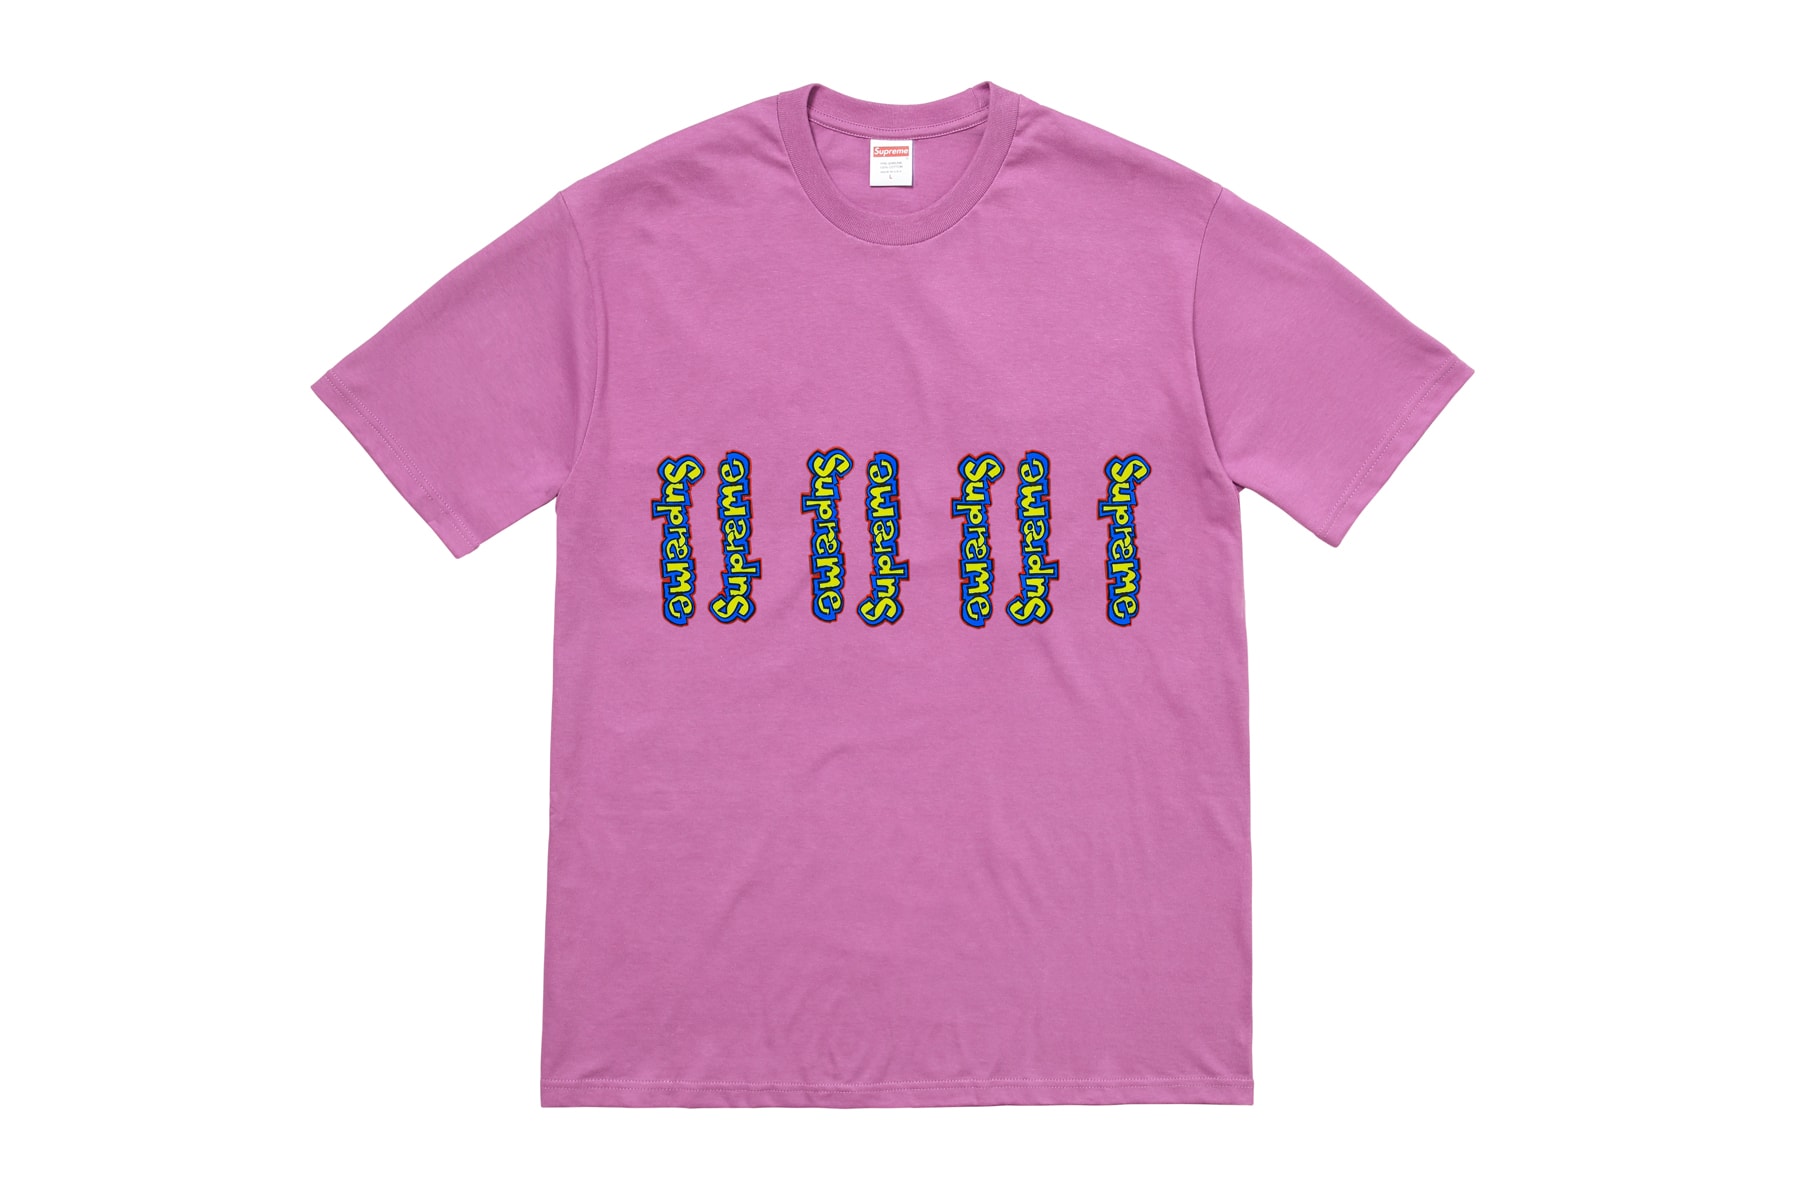 Supreme Summer 2018 T-Shirt Tee Pink Mark Gonz Gonzales Logo Repeating